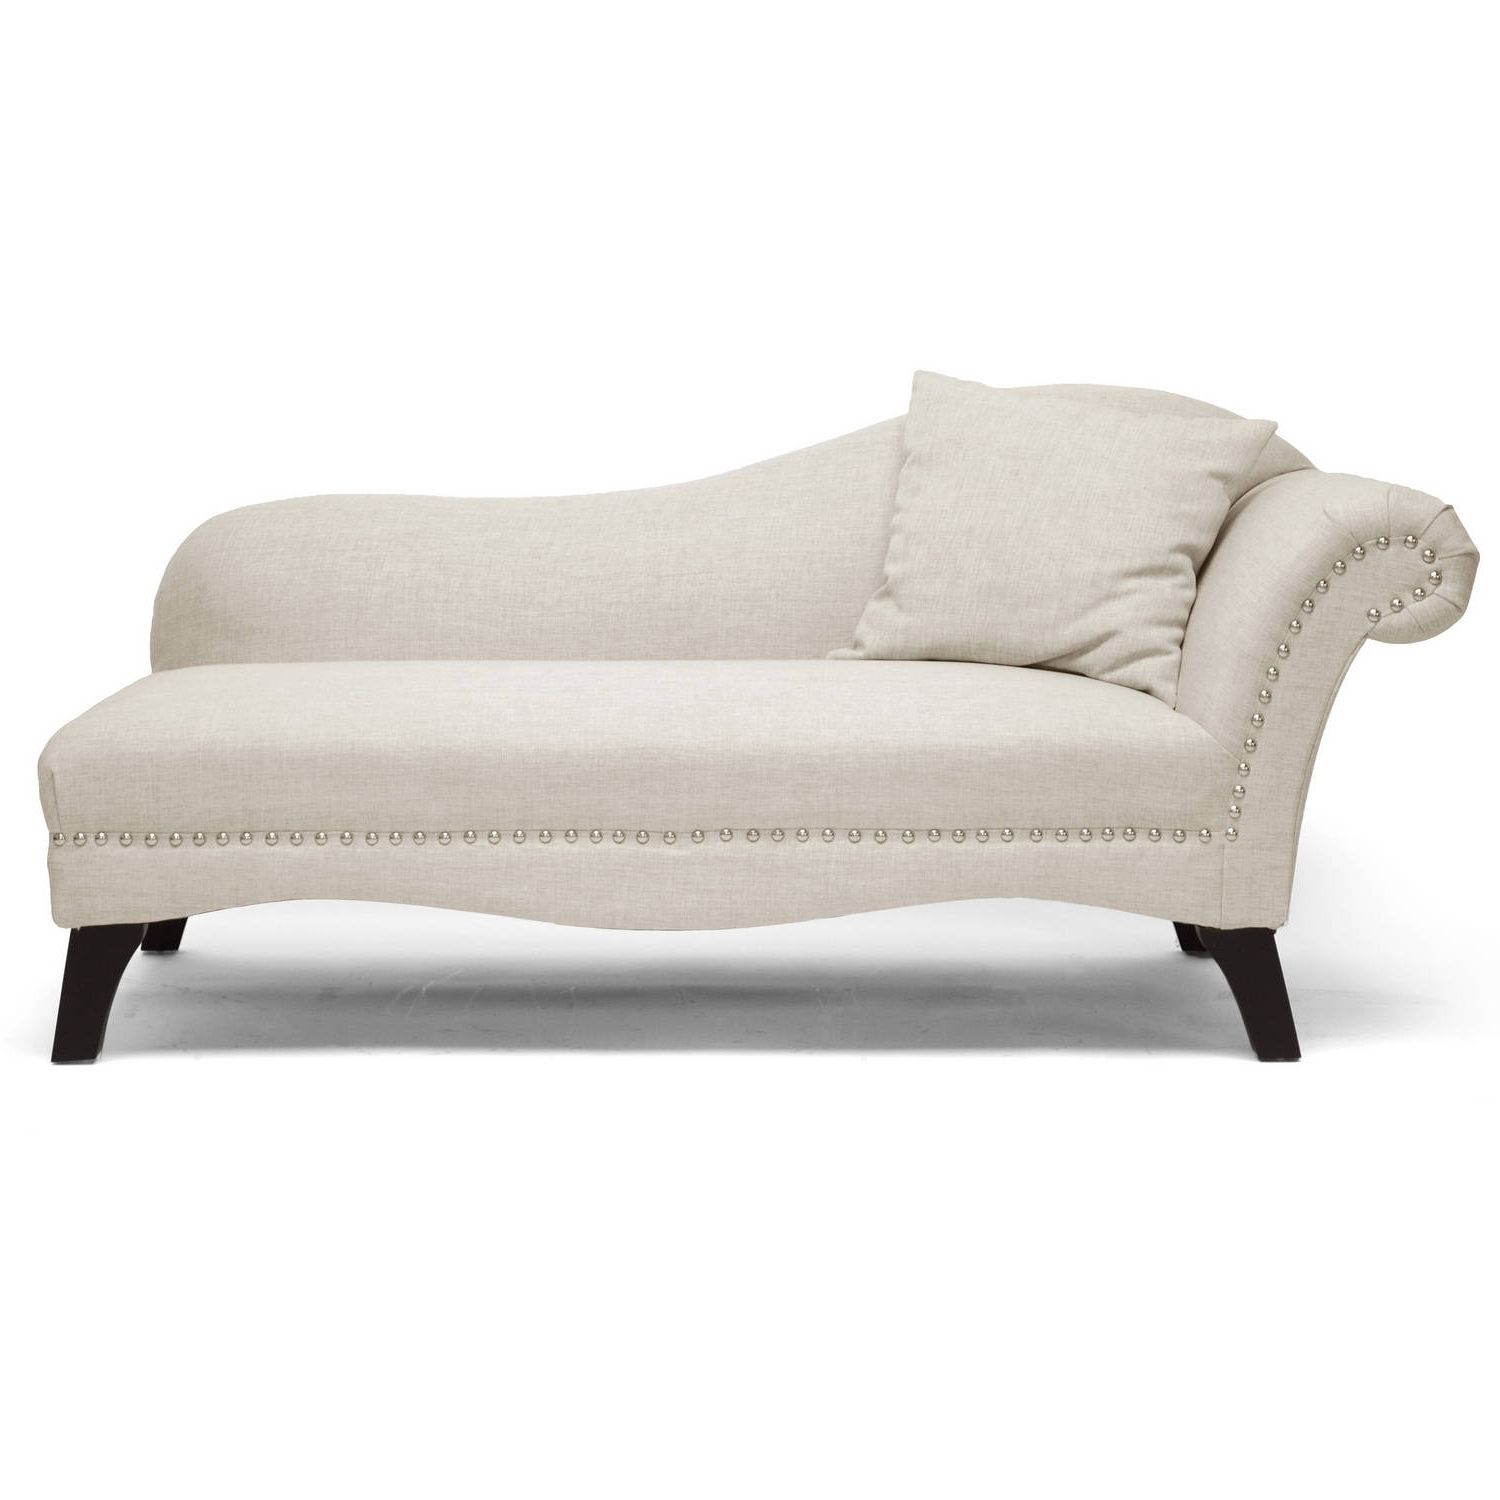 Widely Used Chaise Lounges – Walmart Within Walmart Chaise Lounges (Photo 1 of 15)